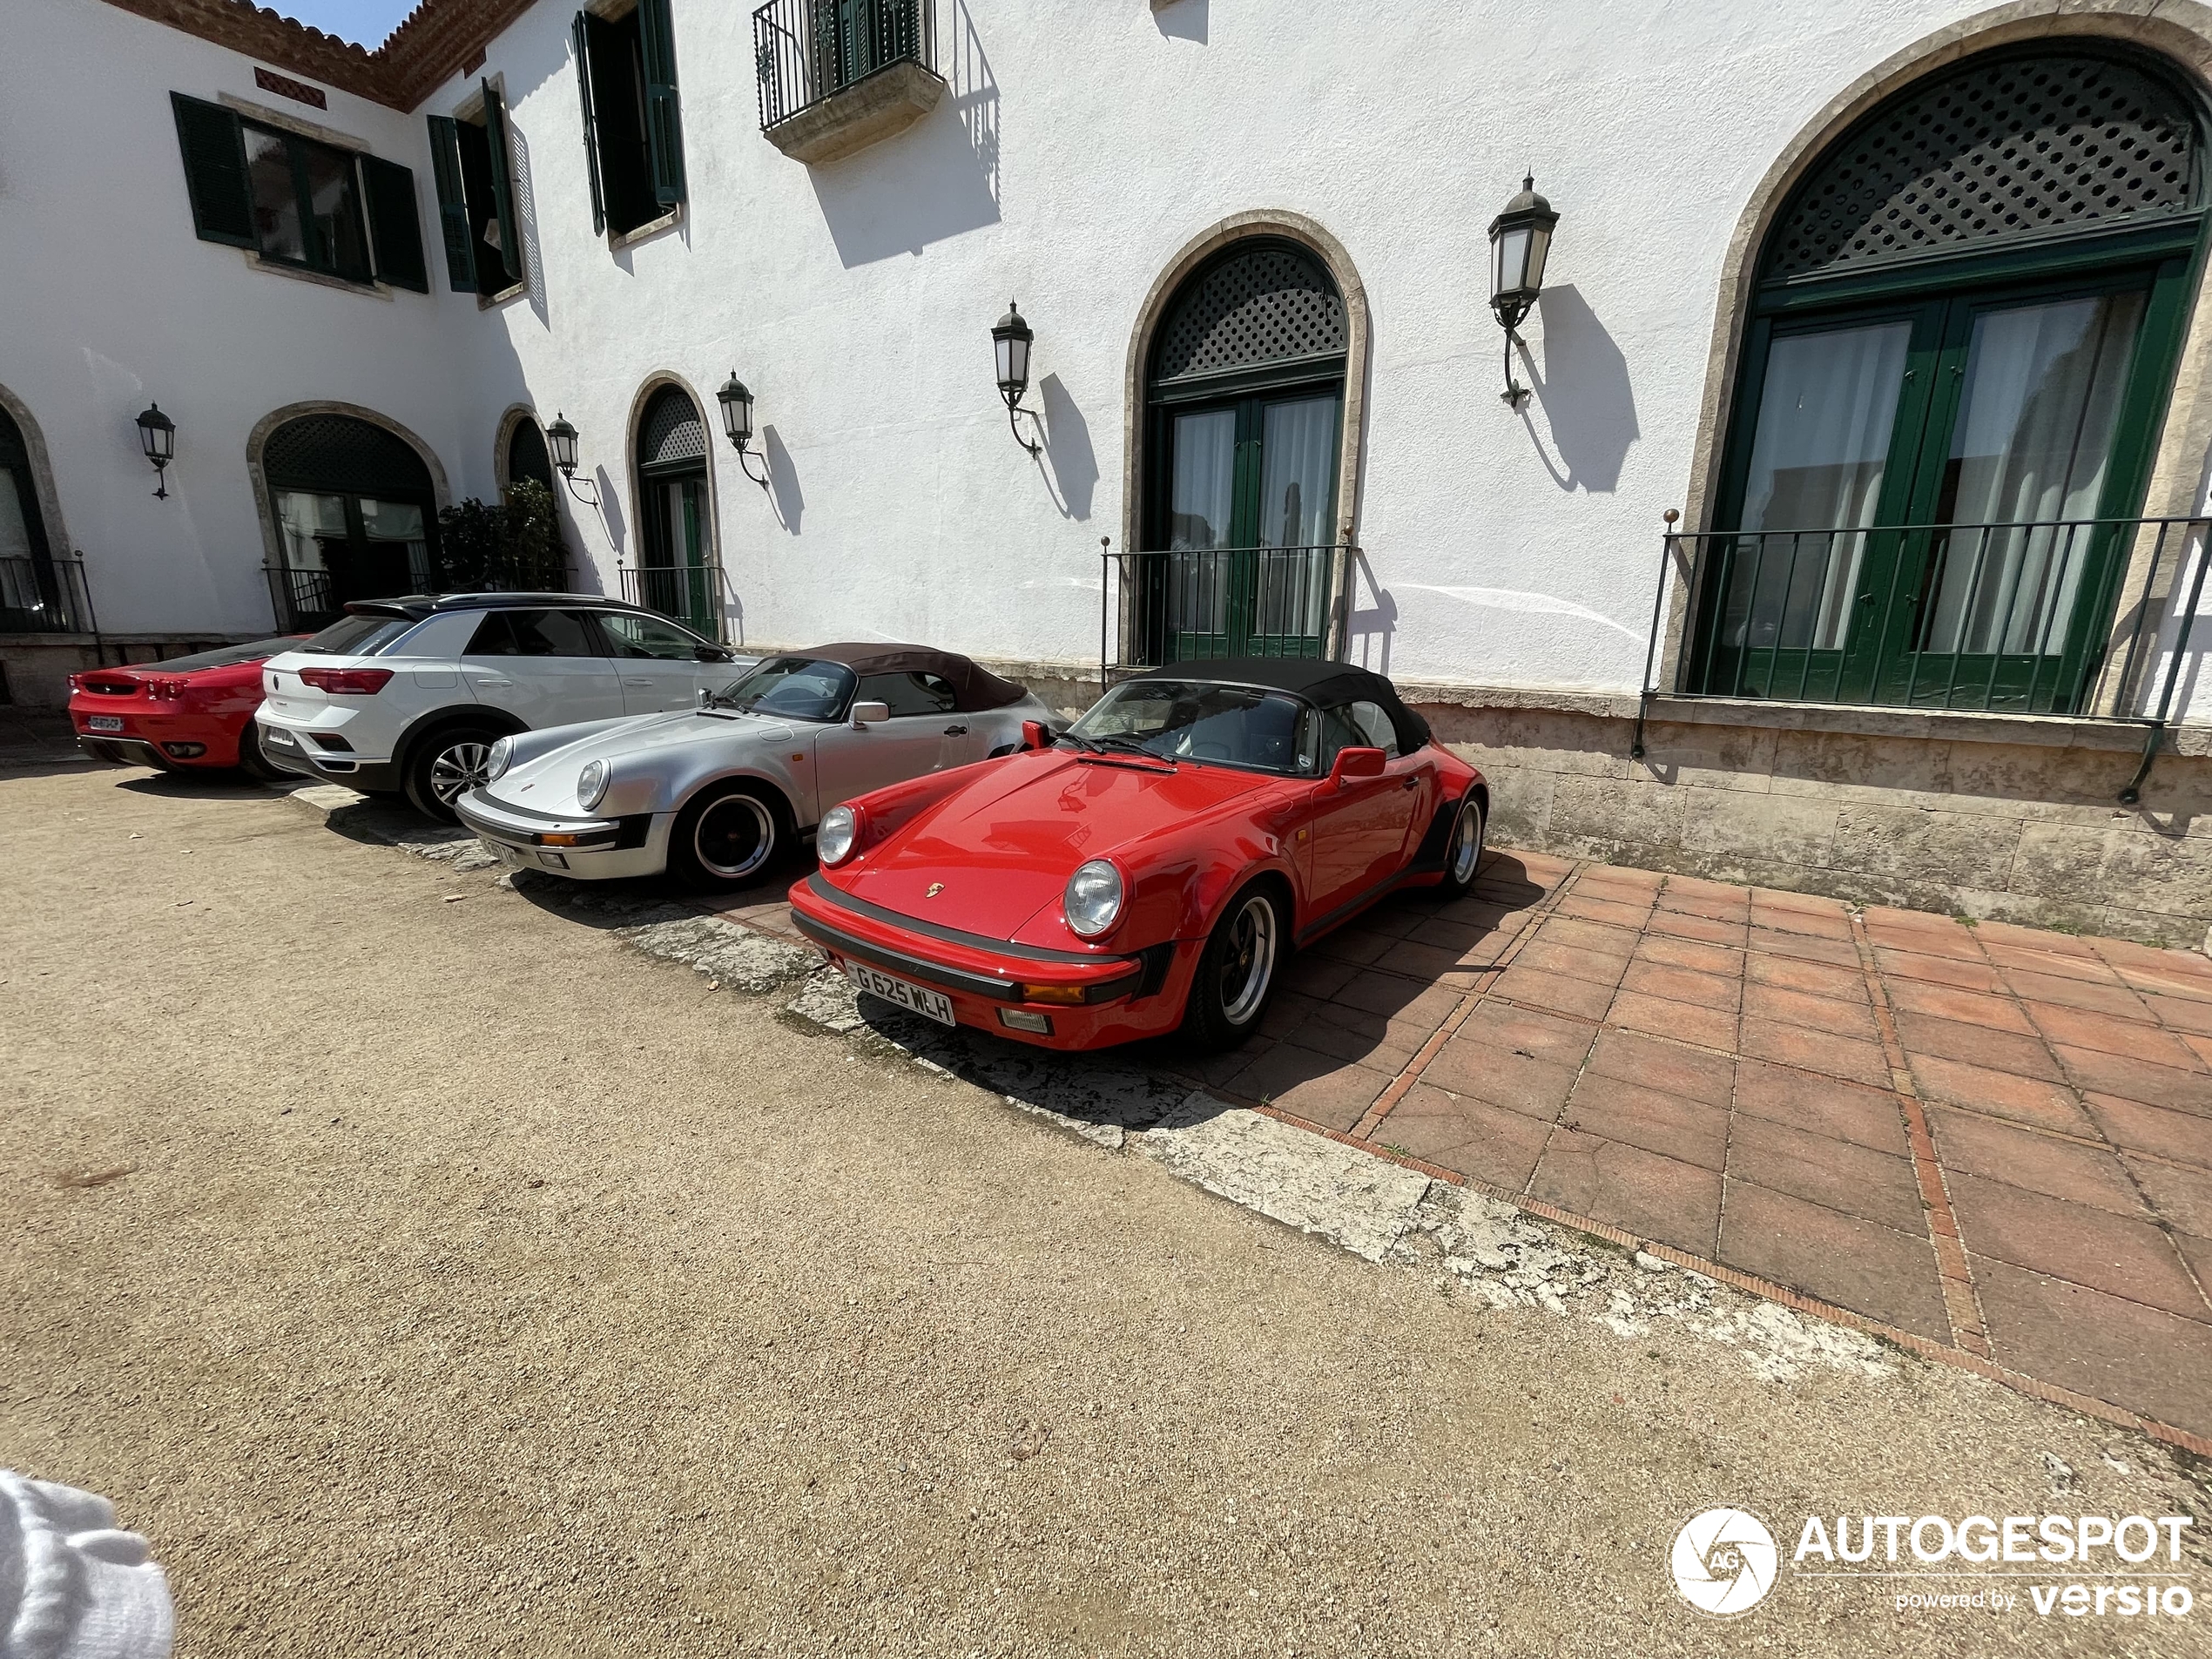 Two rare 930 Speedsters shows up in S'Agaró